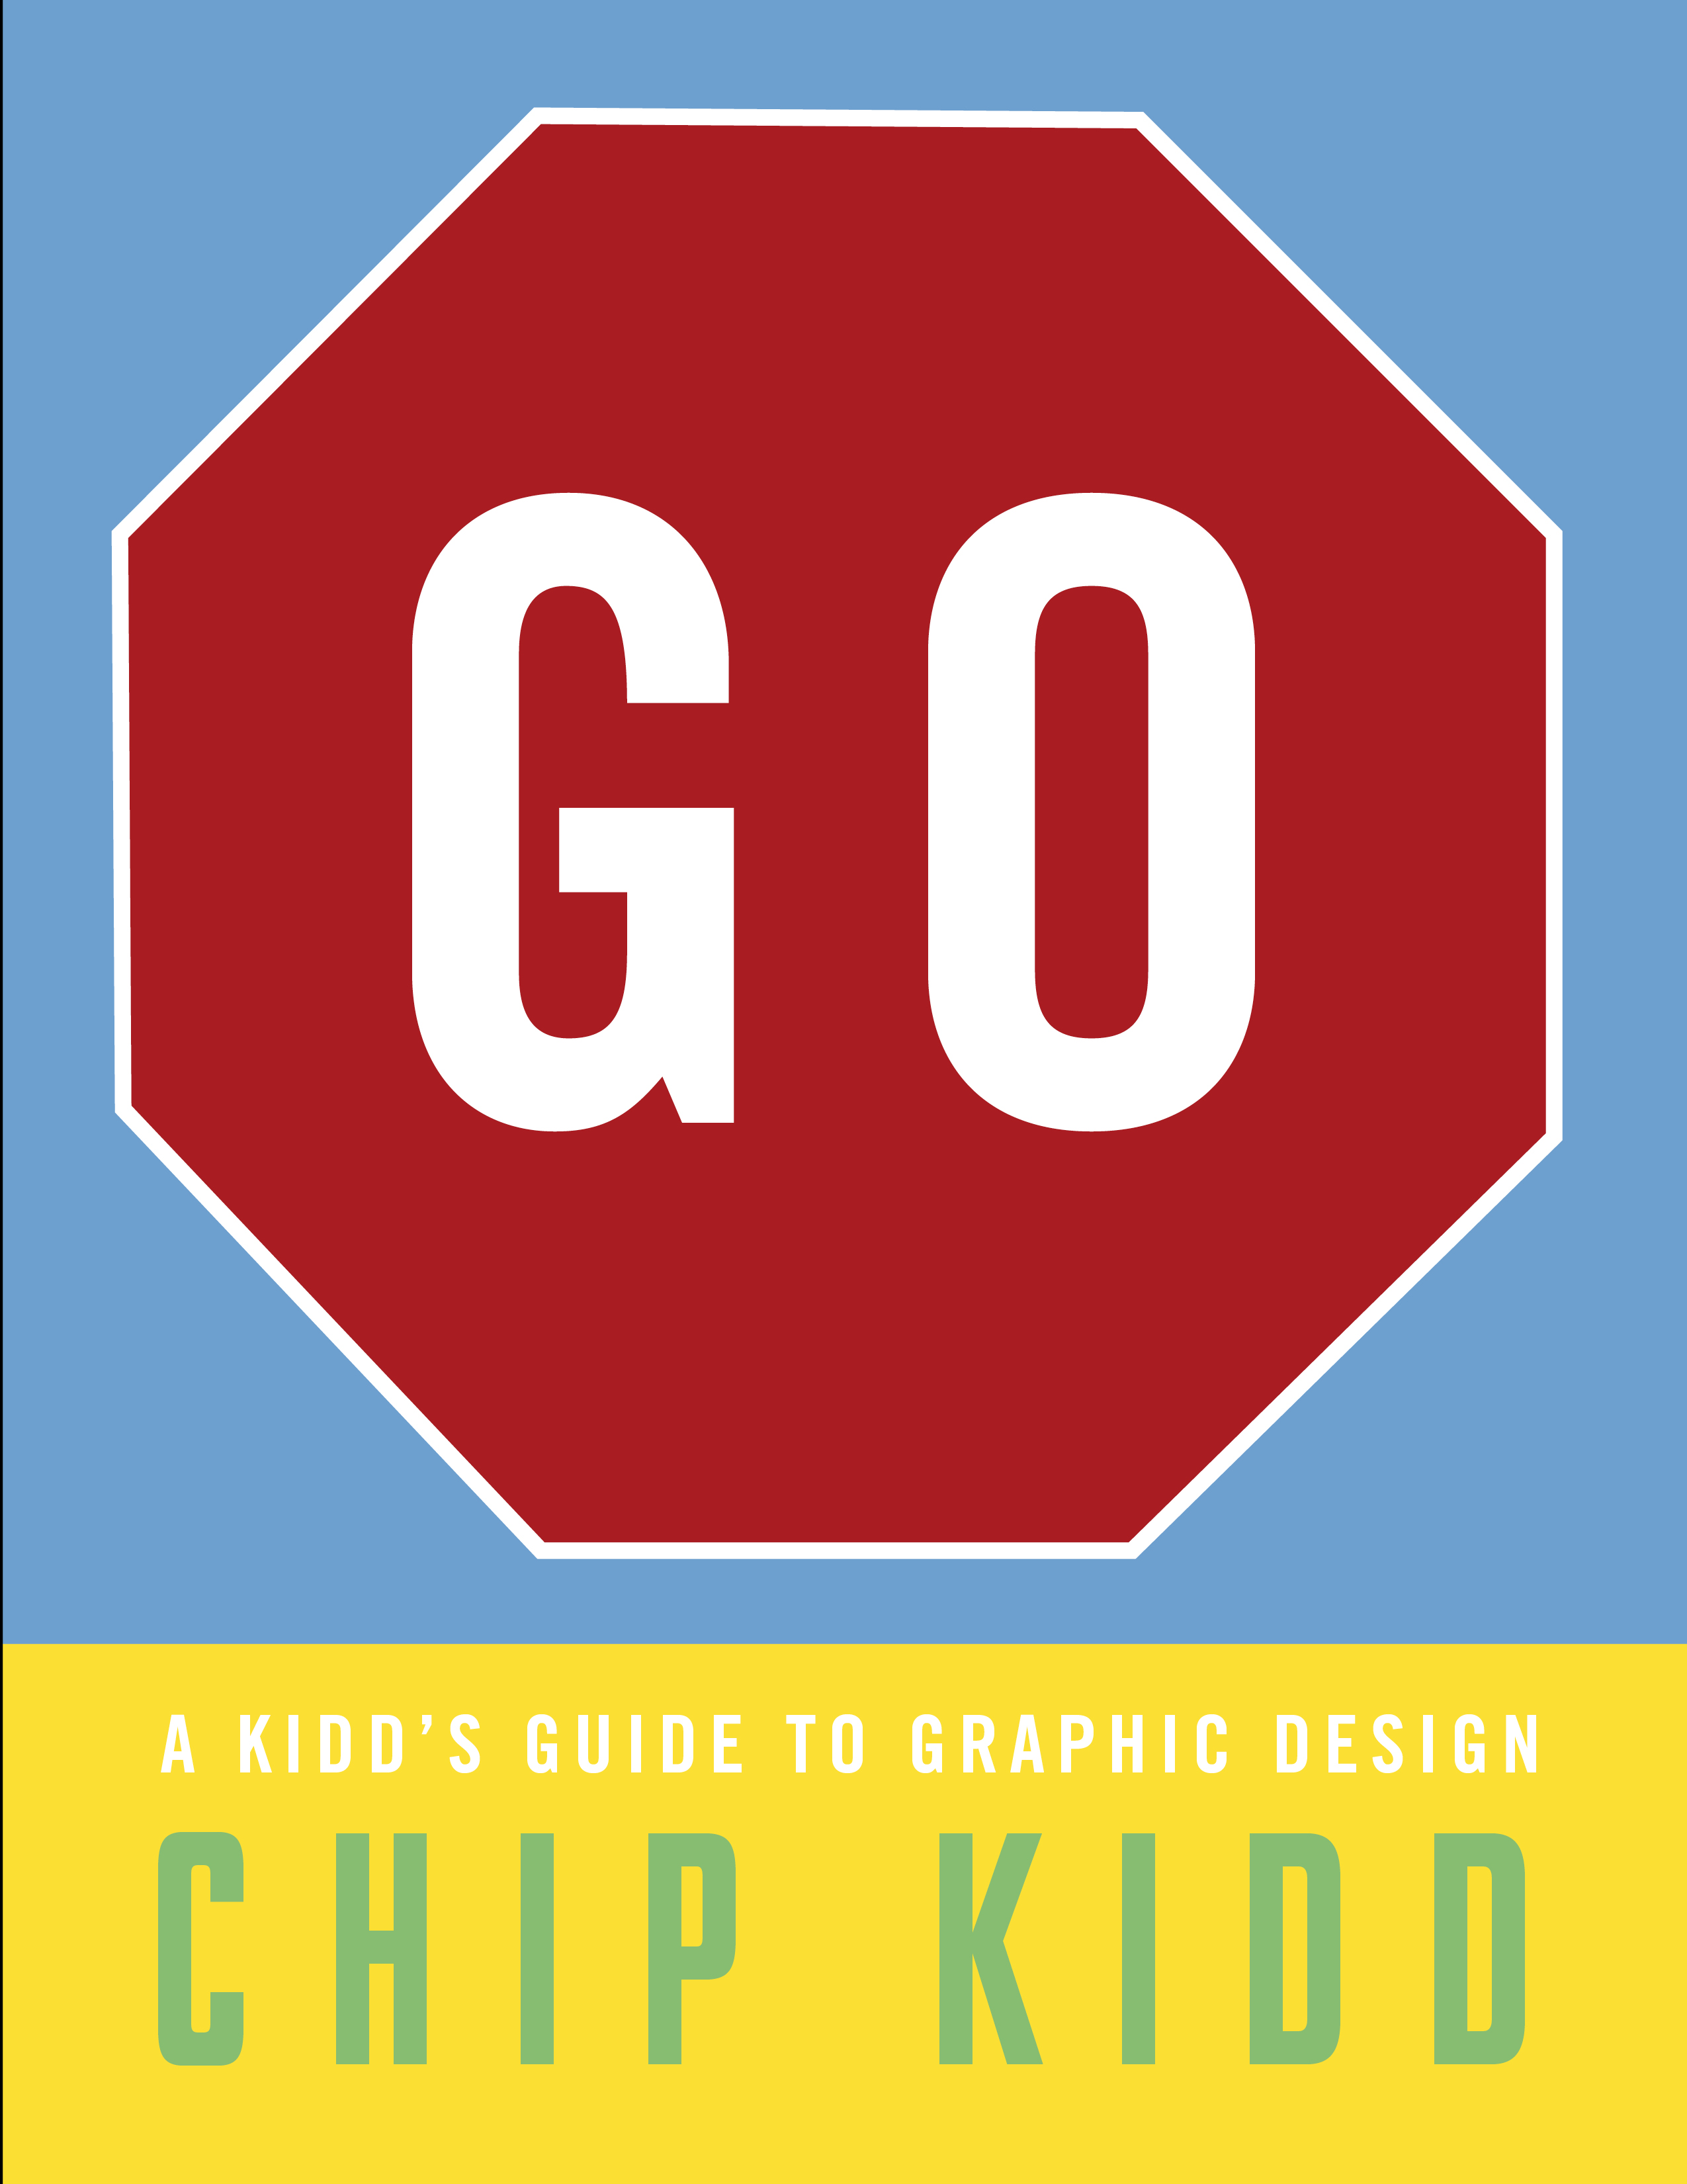 Go: A Kidd's Guide to Graphic Design by Chp Kidd